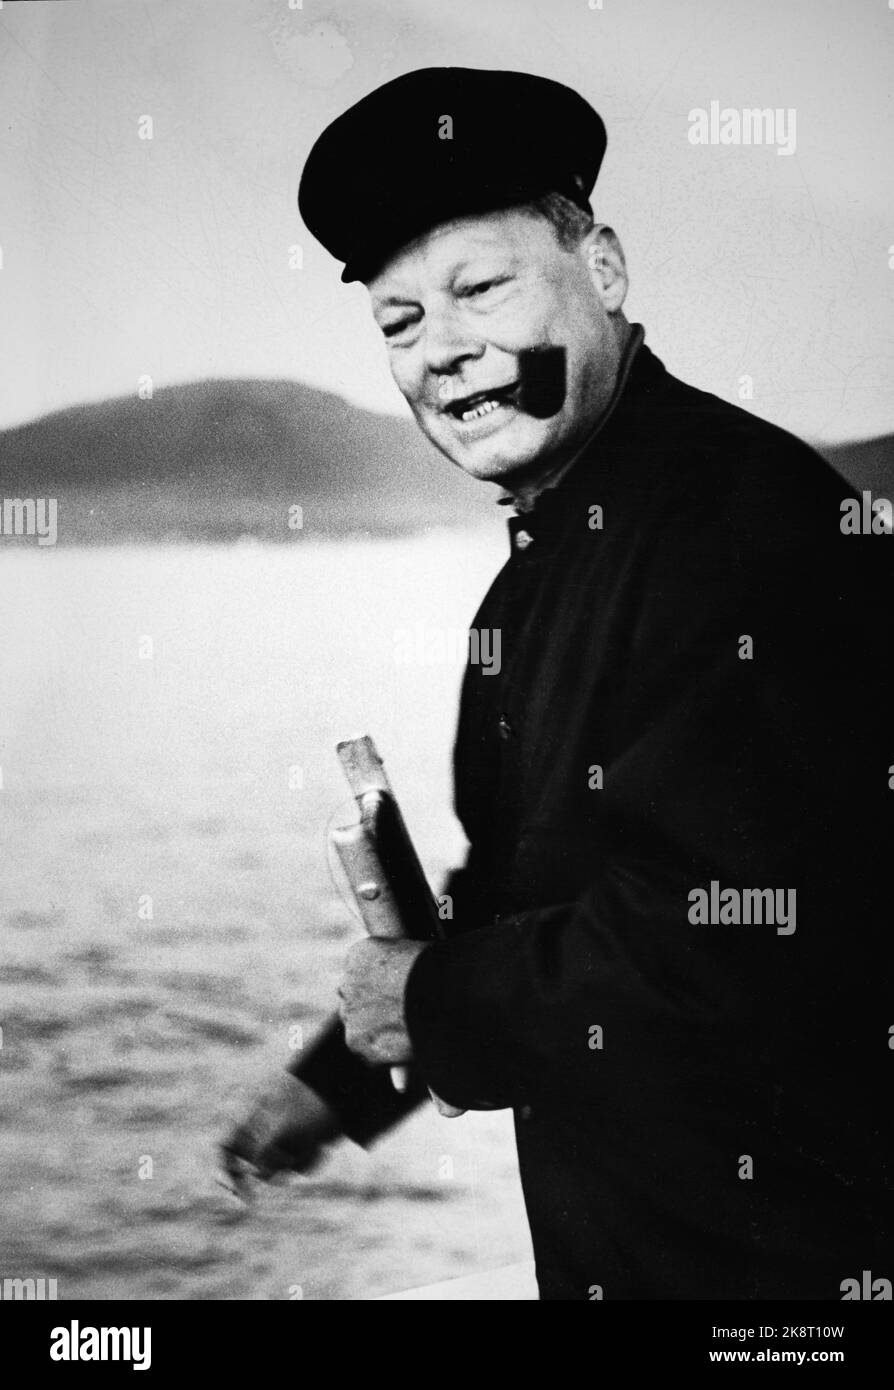 19680819. Foreign Minister Willy Brandt from West Germany on holiday in Norway. Photographed outside Narvik where he was on a fishing trip. The minister got three saithe, but lost two. Brandt is on unofficial visit to Norway. Photo: NTB   SPBEKEIL Stock Photo